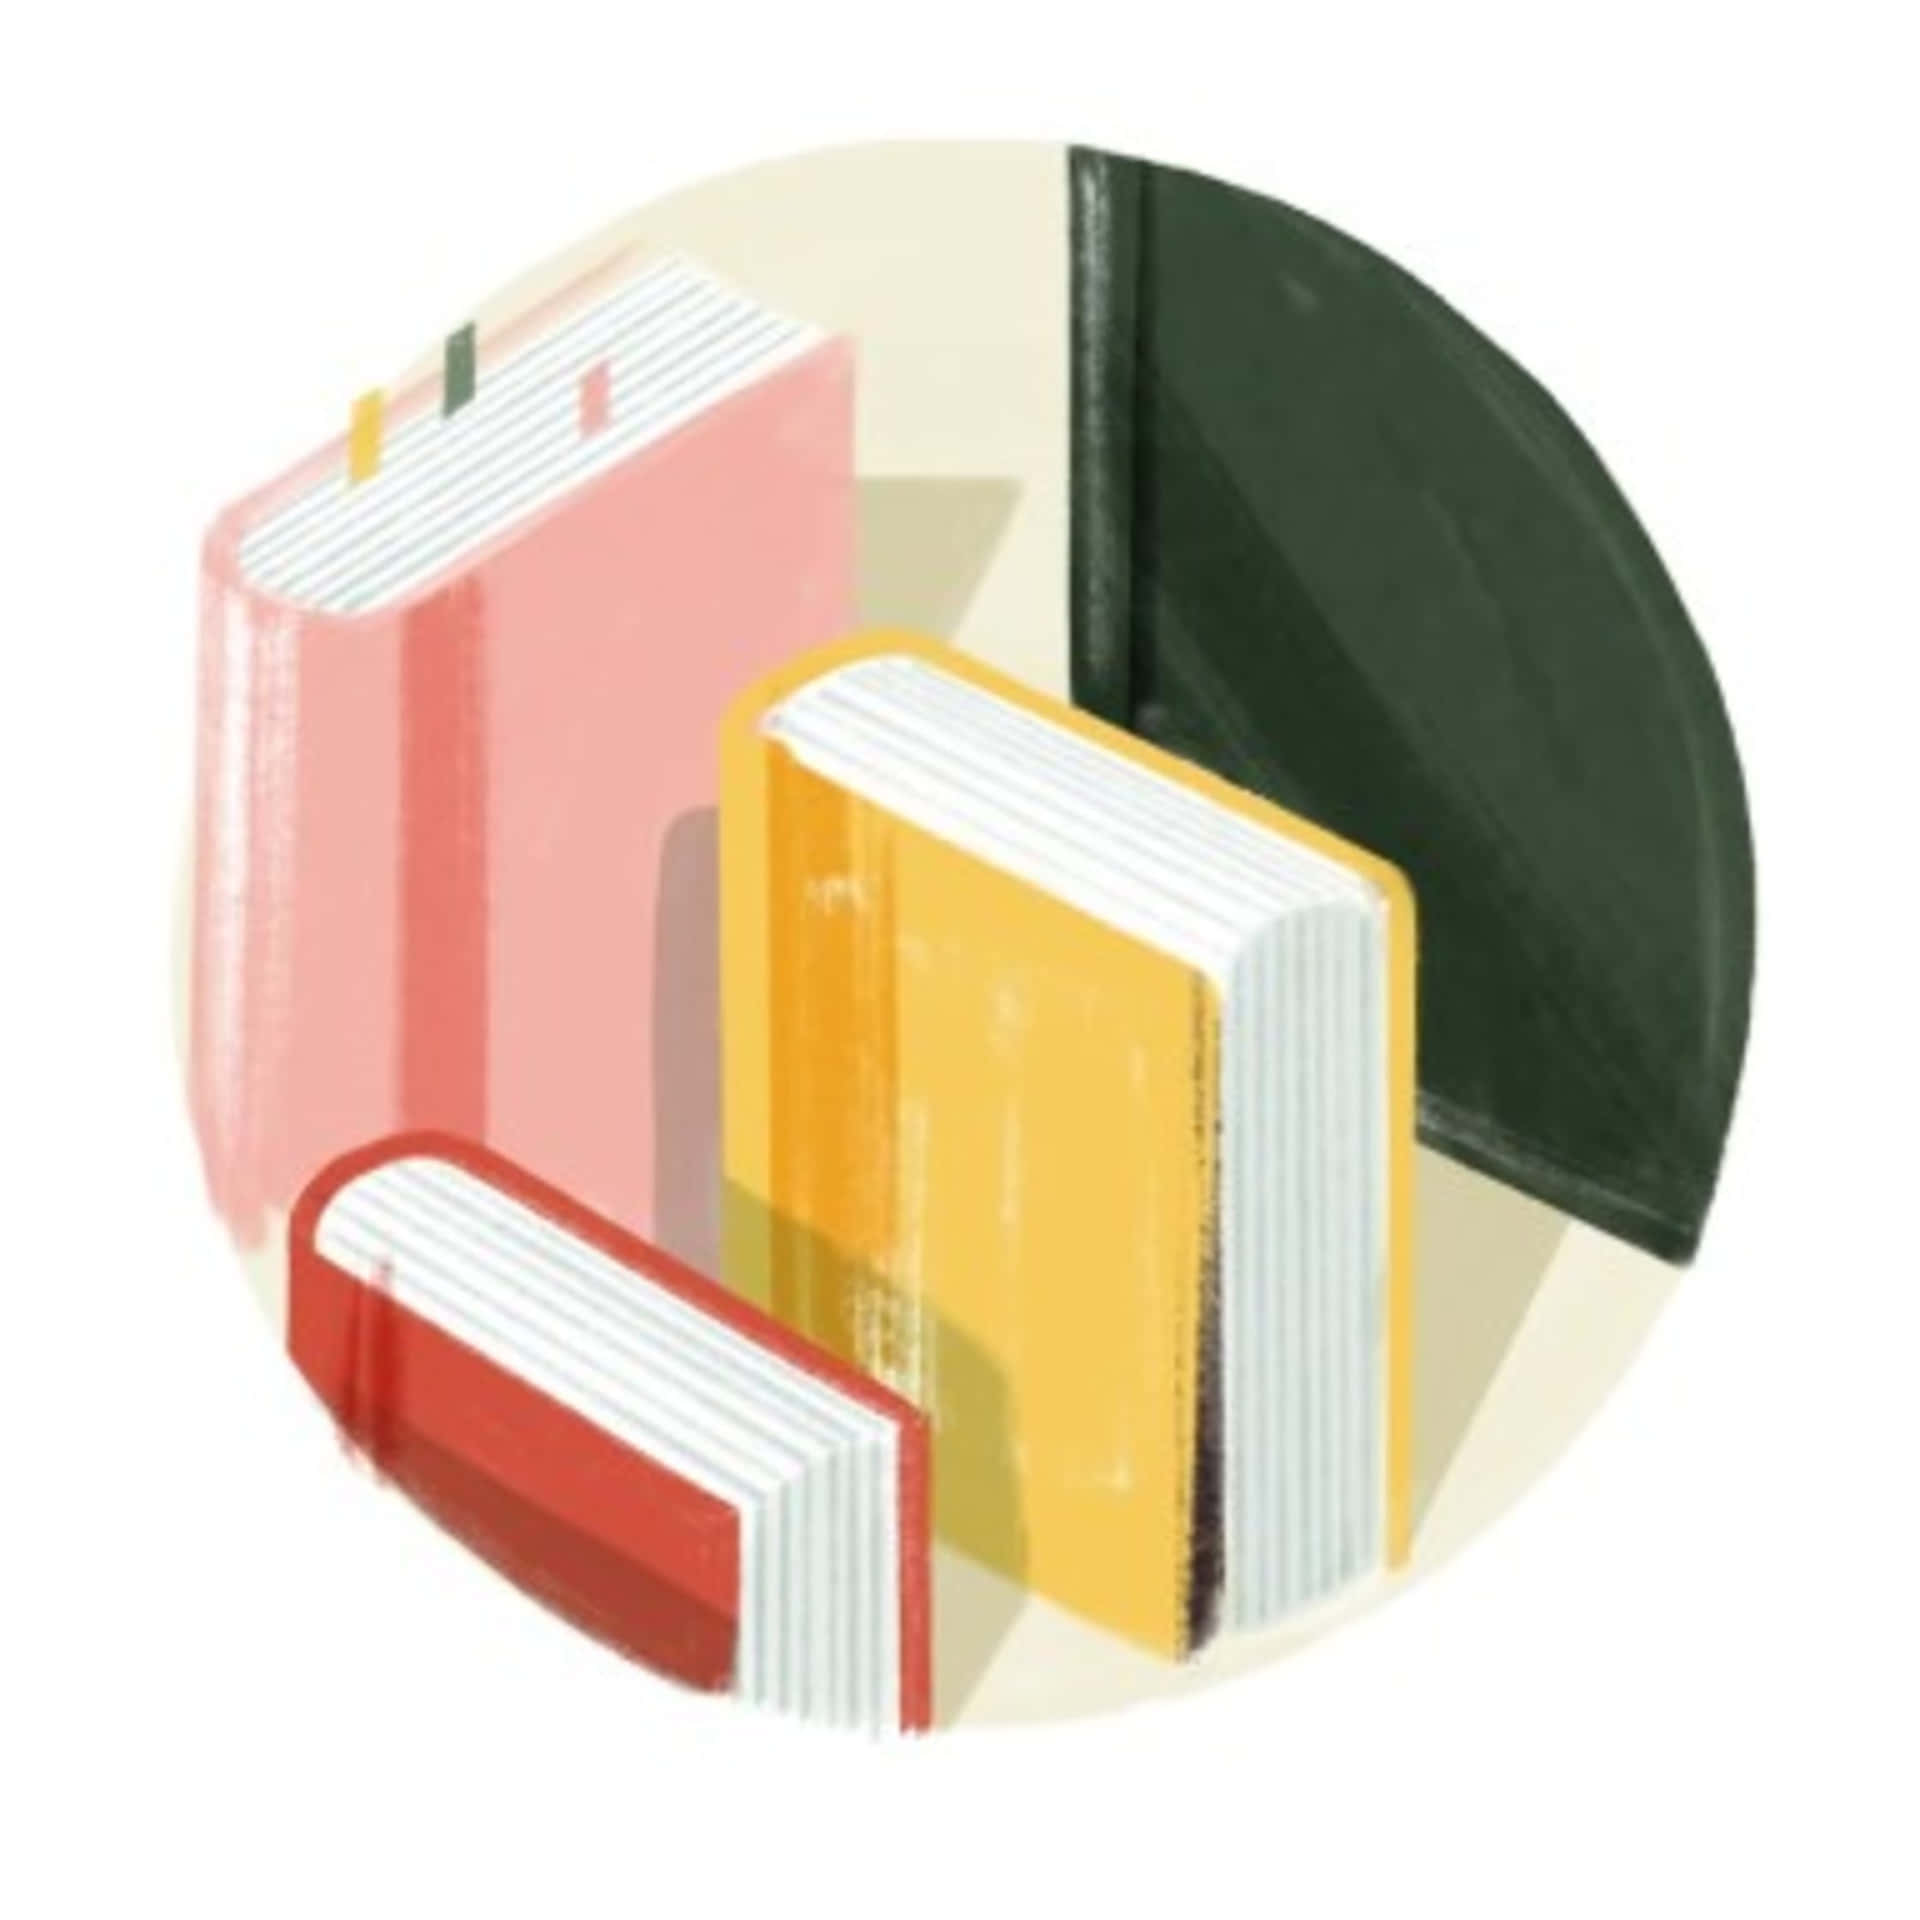 Illustration Of Books In A Circle